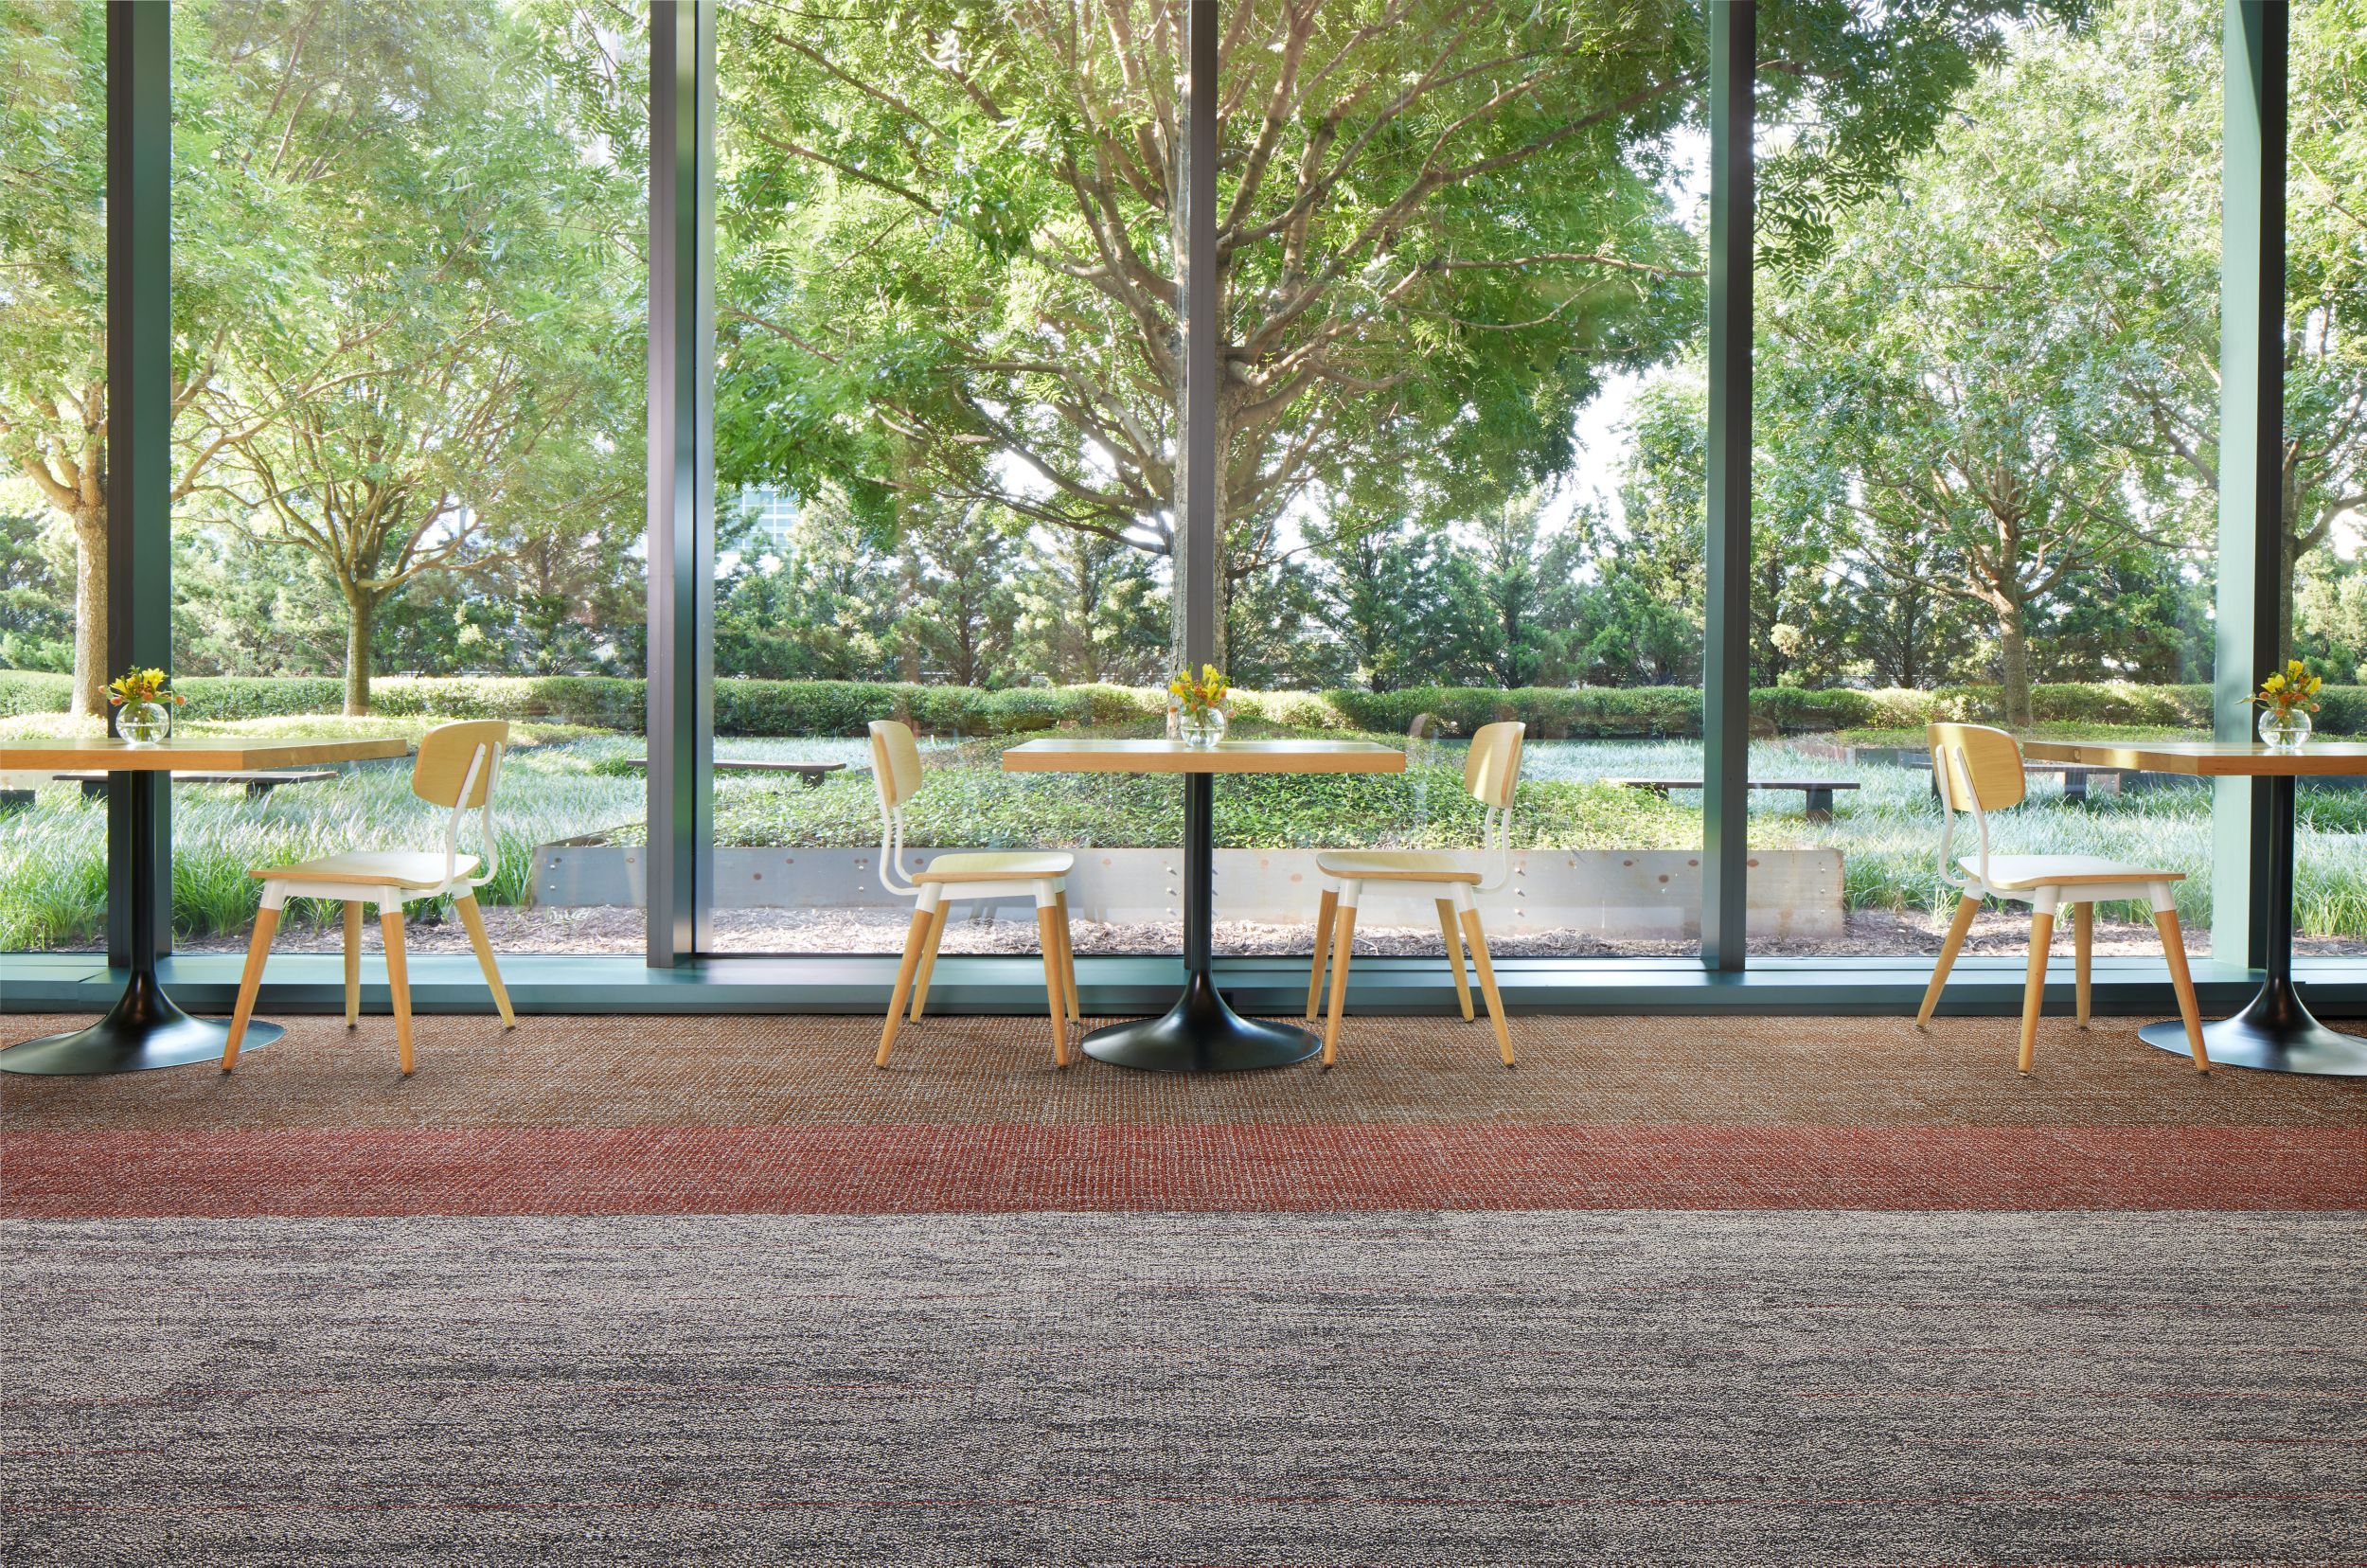 Interface Open Air Stria 402 and Open Ended carpet tile in lobby setting with tables and open plan windows numéro d’image 4